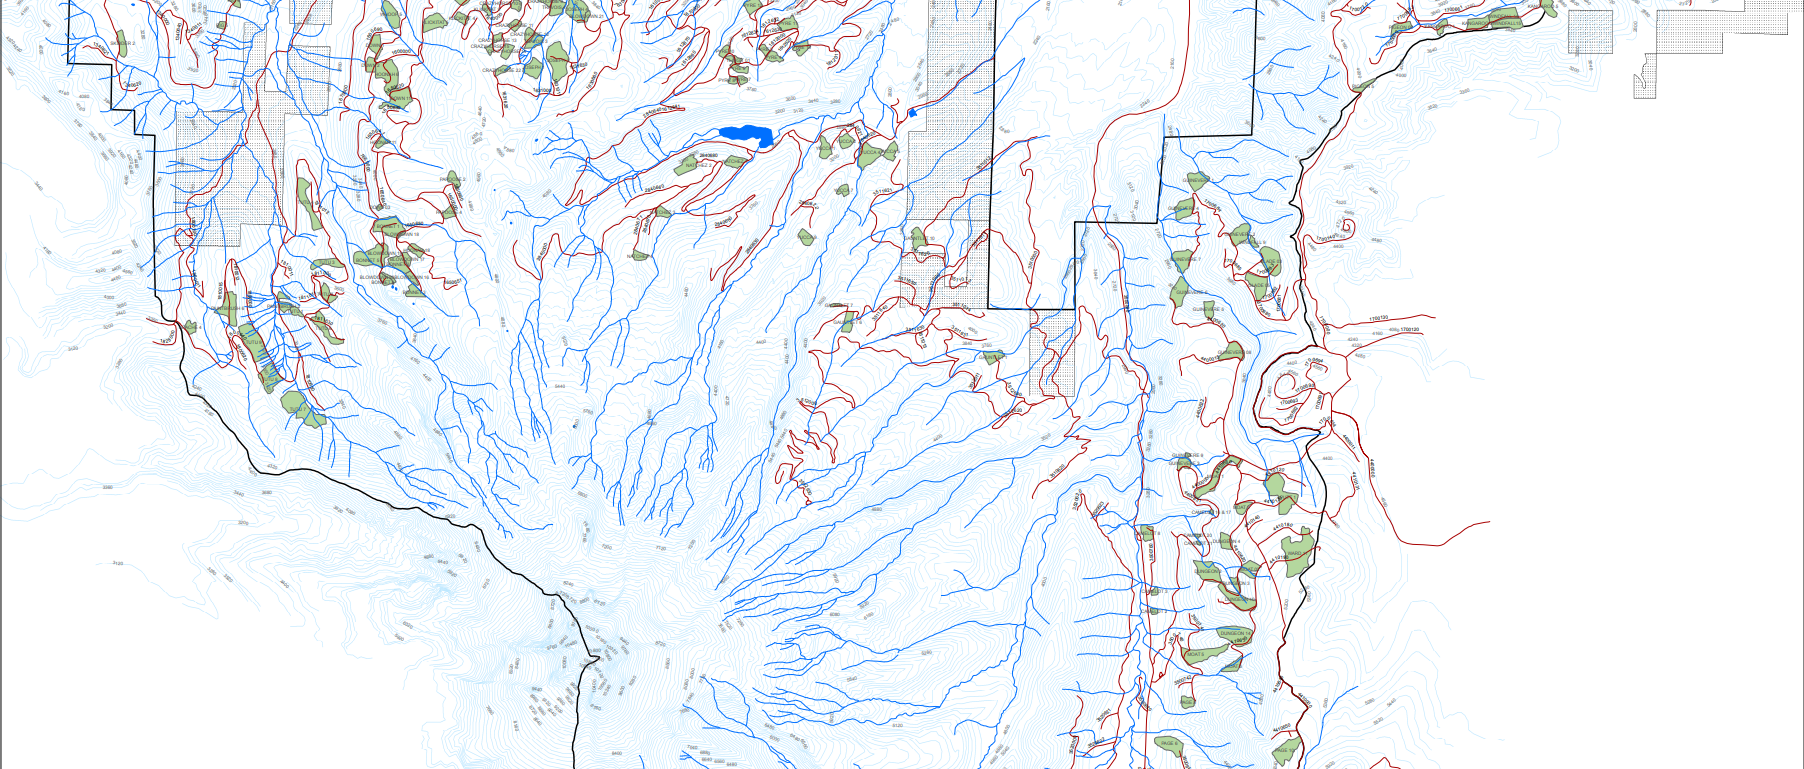 This is a snapshot of a map of hood river road, it has blue lines to represent the streams going across.